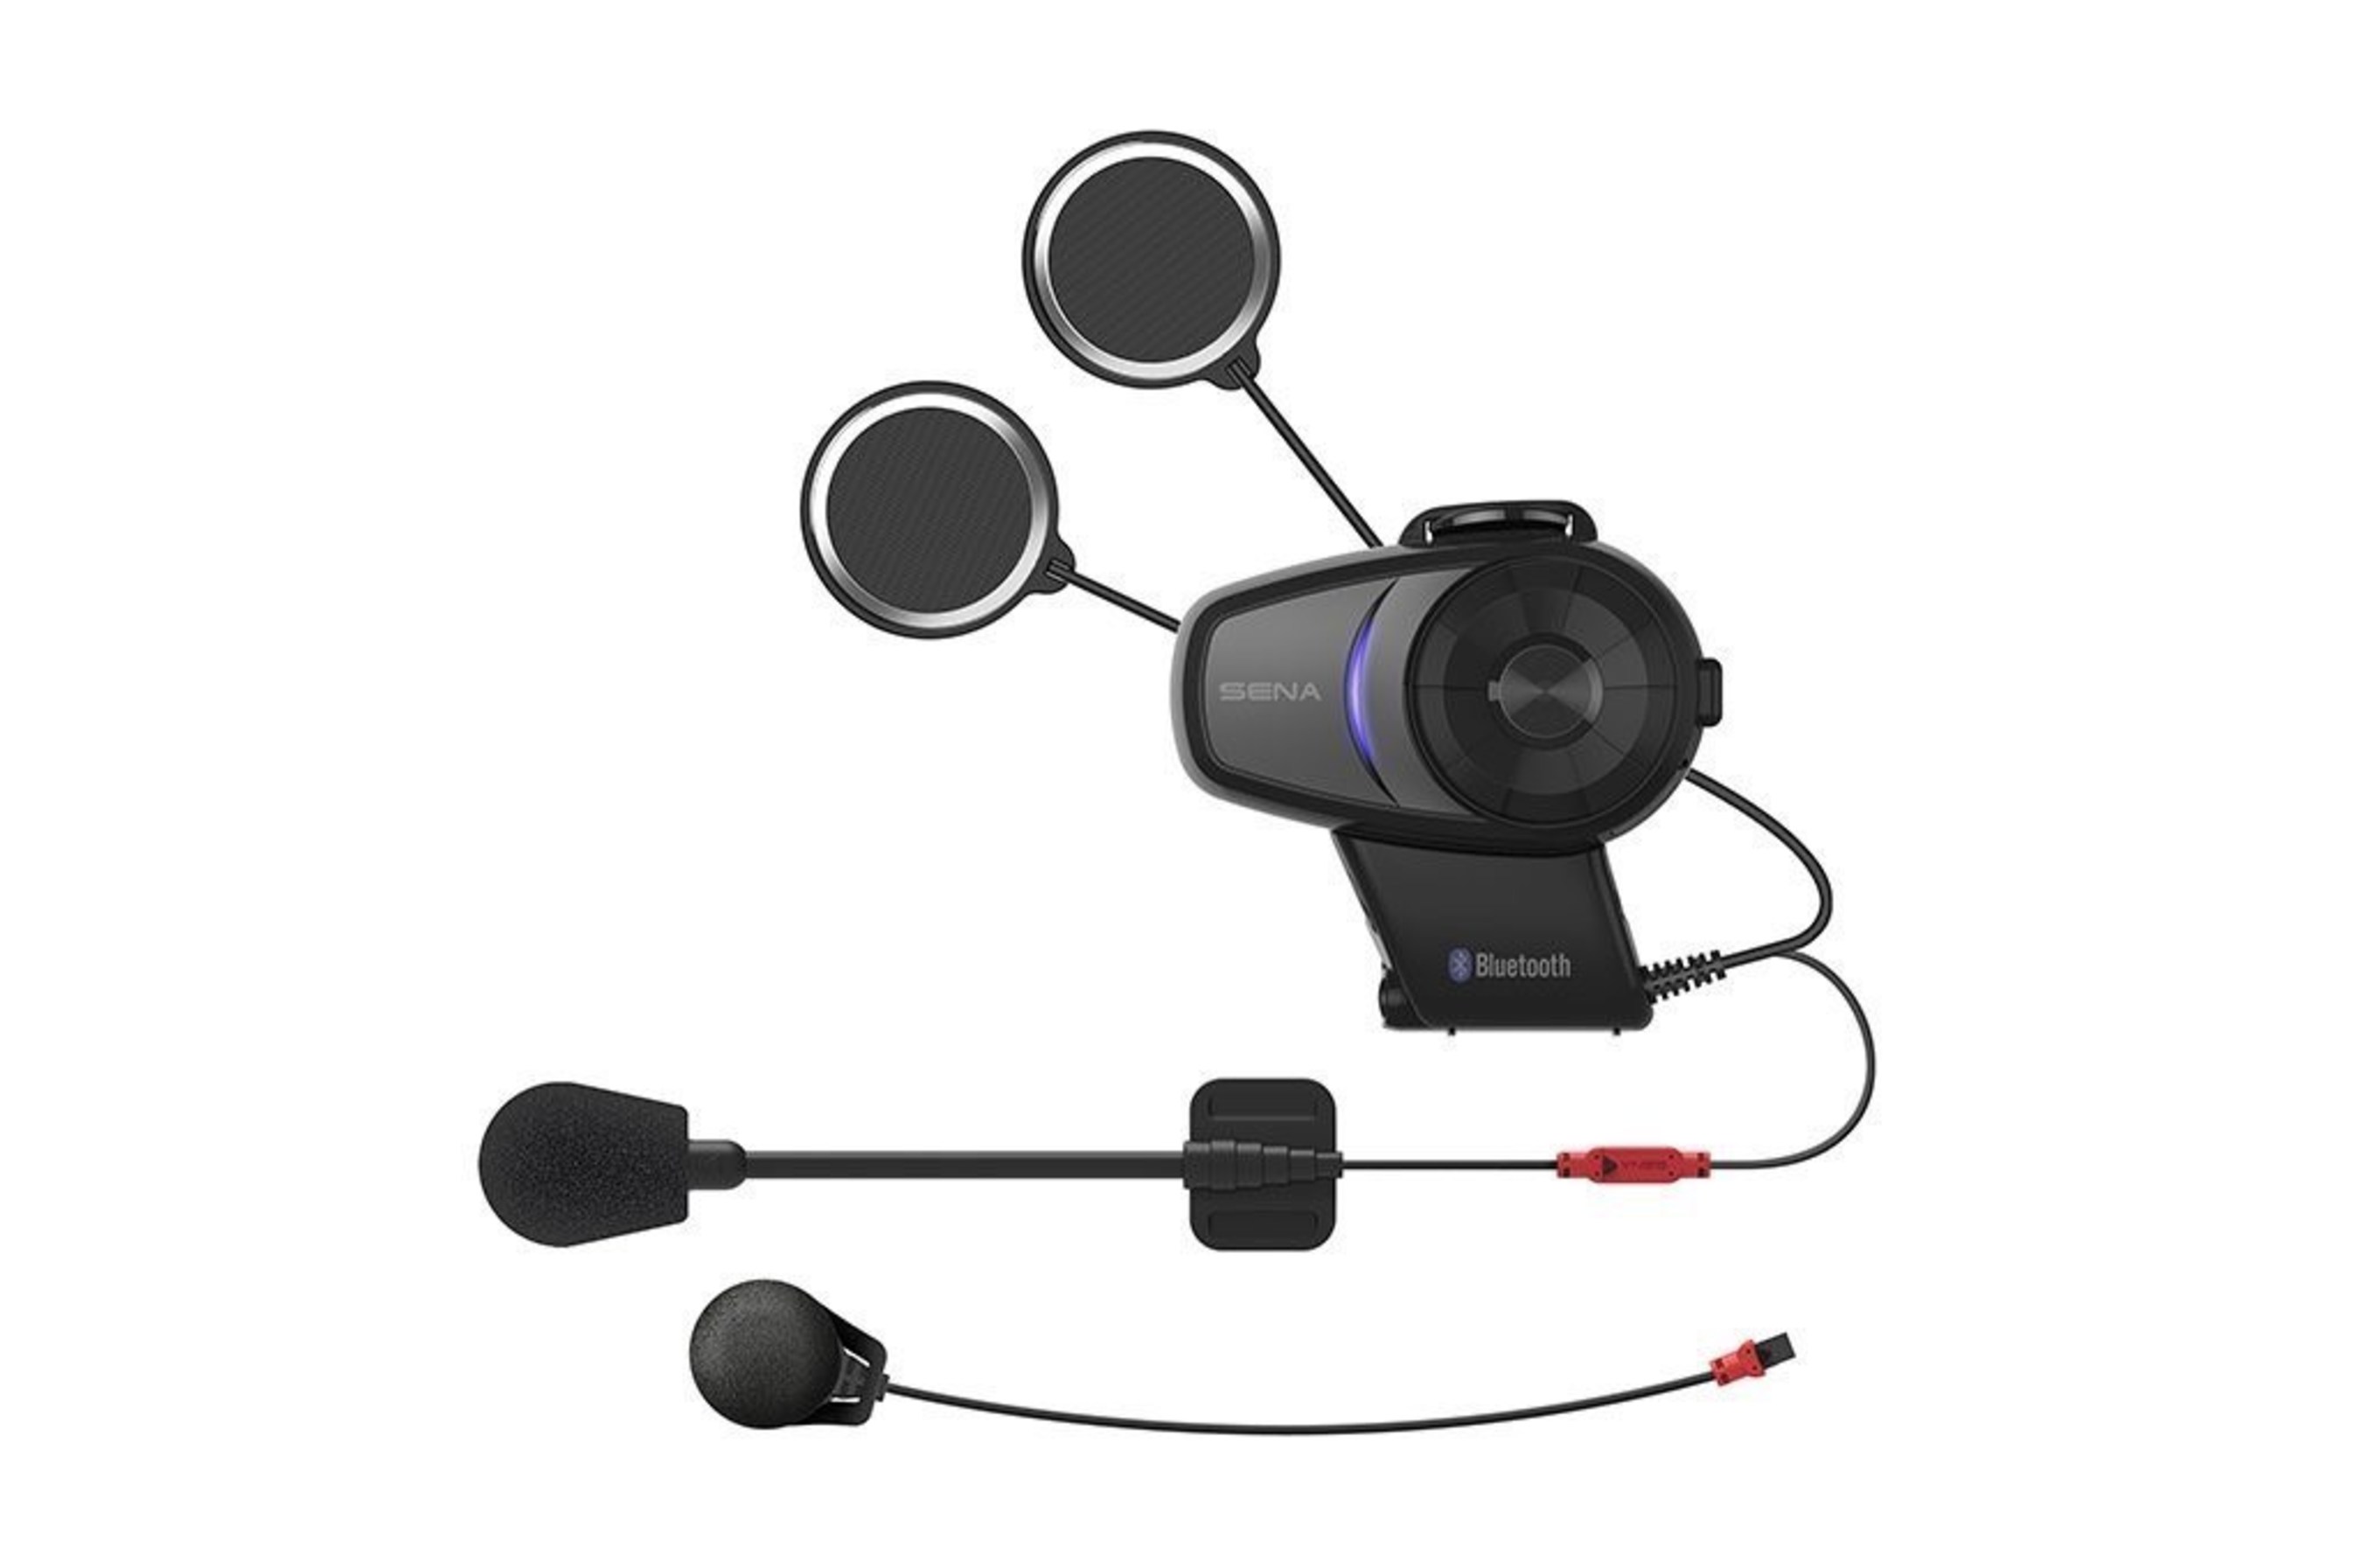 The new Sena 10S features an all-in-one clamp that supports any type of microphone and includes an earbud connector as well.